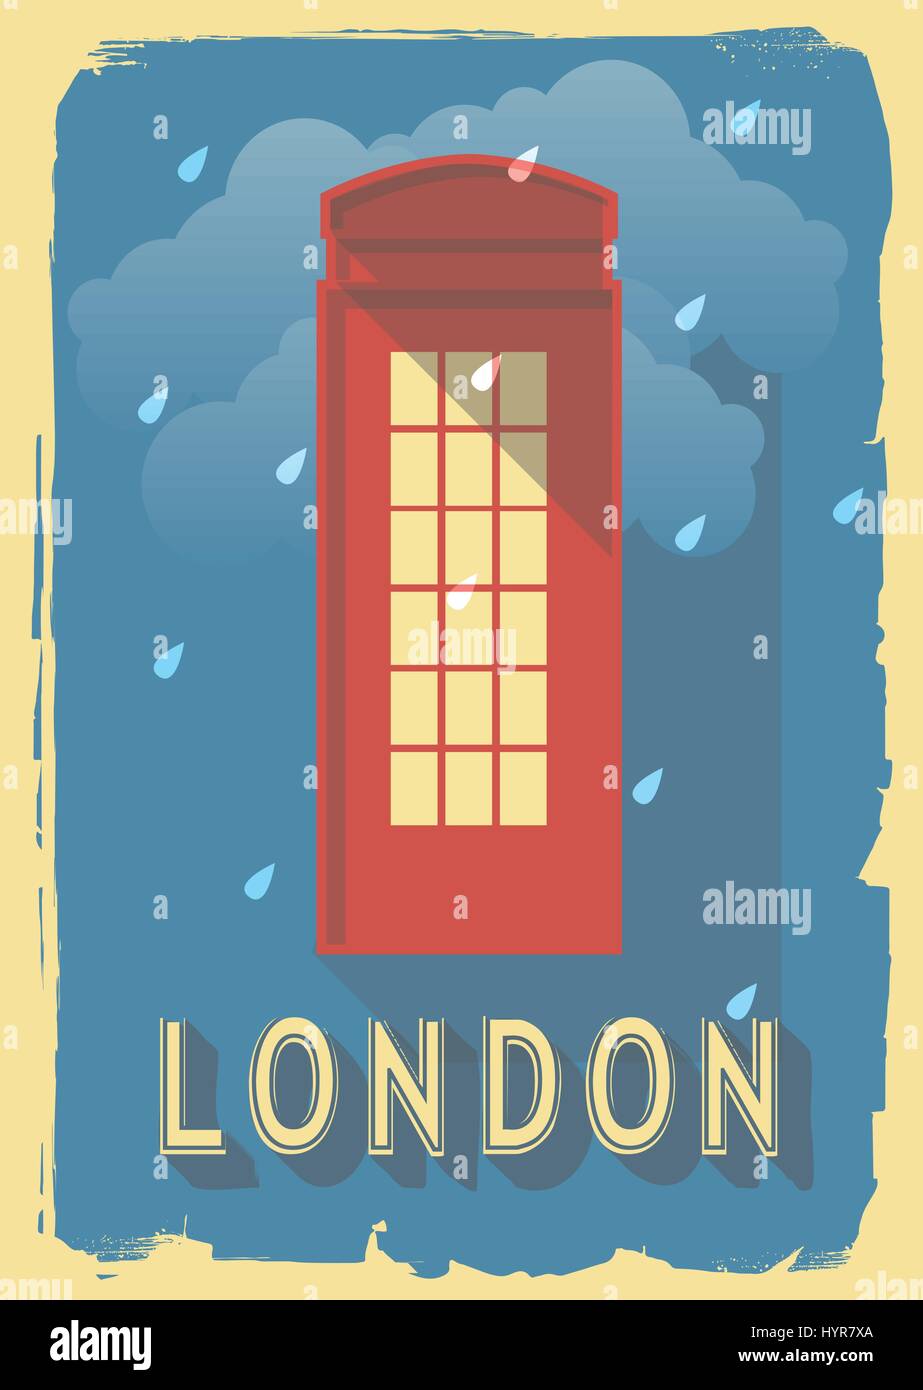 vector illustration phone box of london england on retro style poster or postcard. Stock Vector